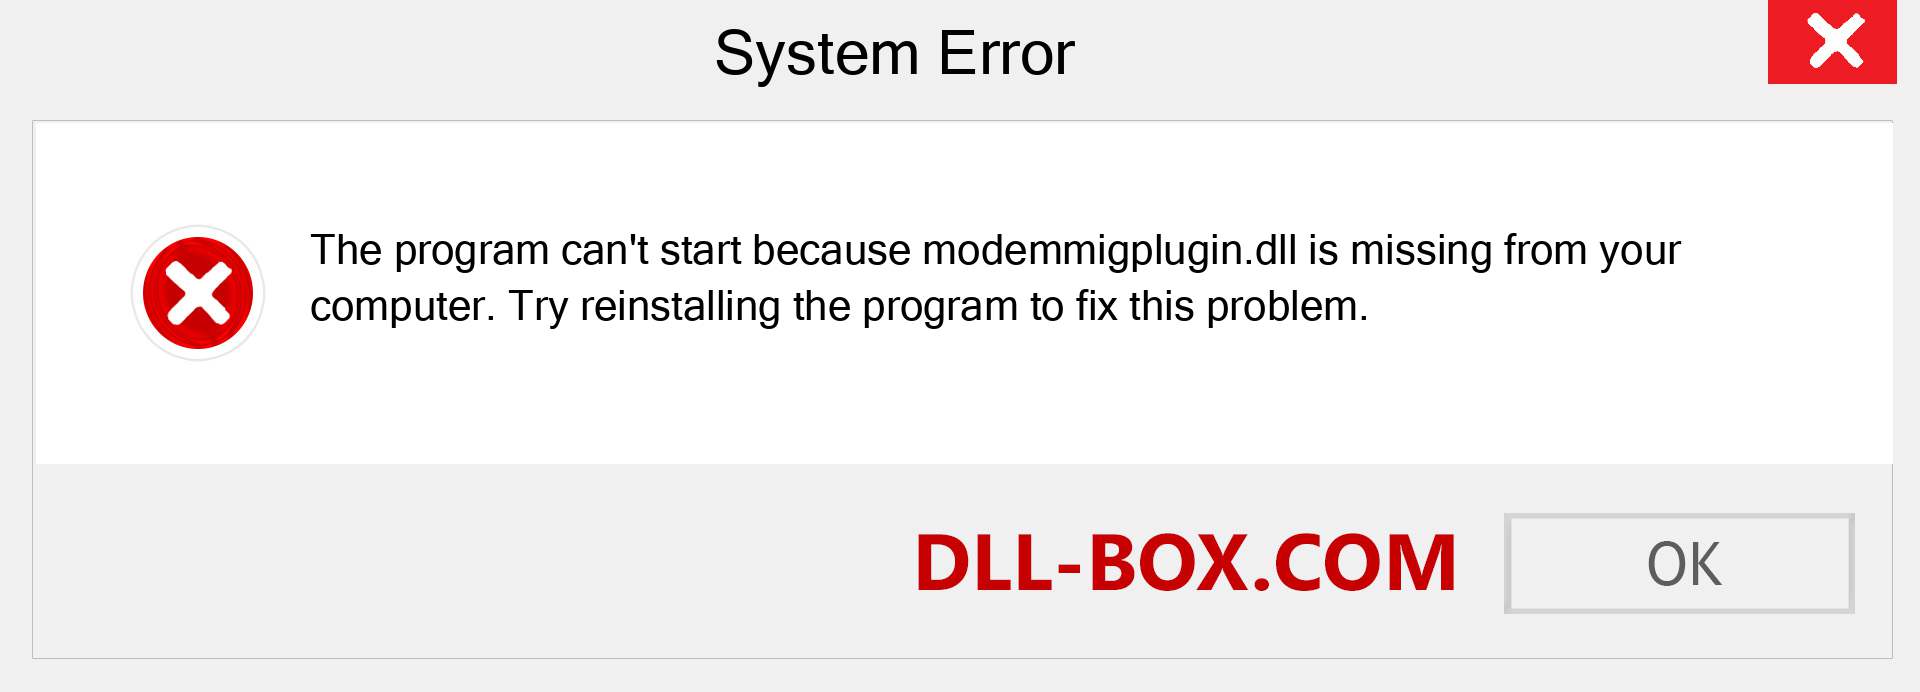  modemmigplugin.dll file is missing?. Download for Windows 7, 8, 10 - Fix  modemmigplugin dll Missing Error on Windows, photos, images